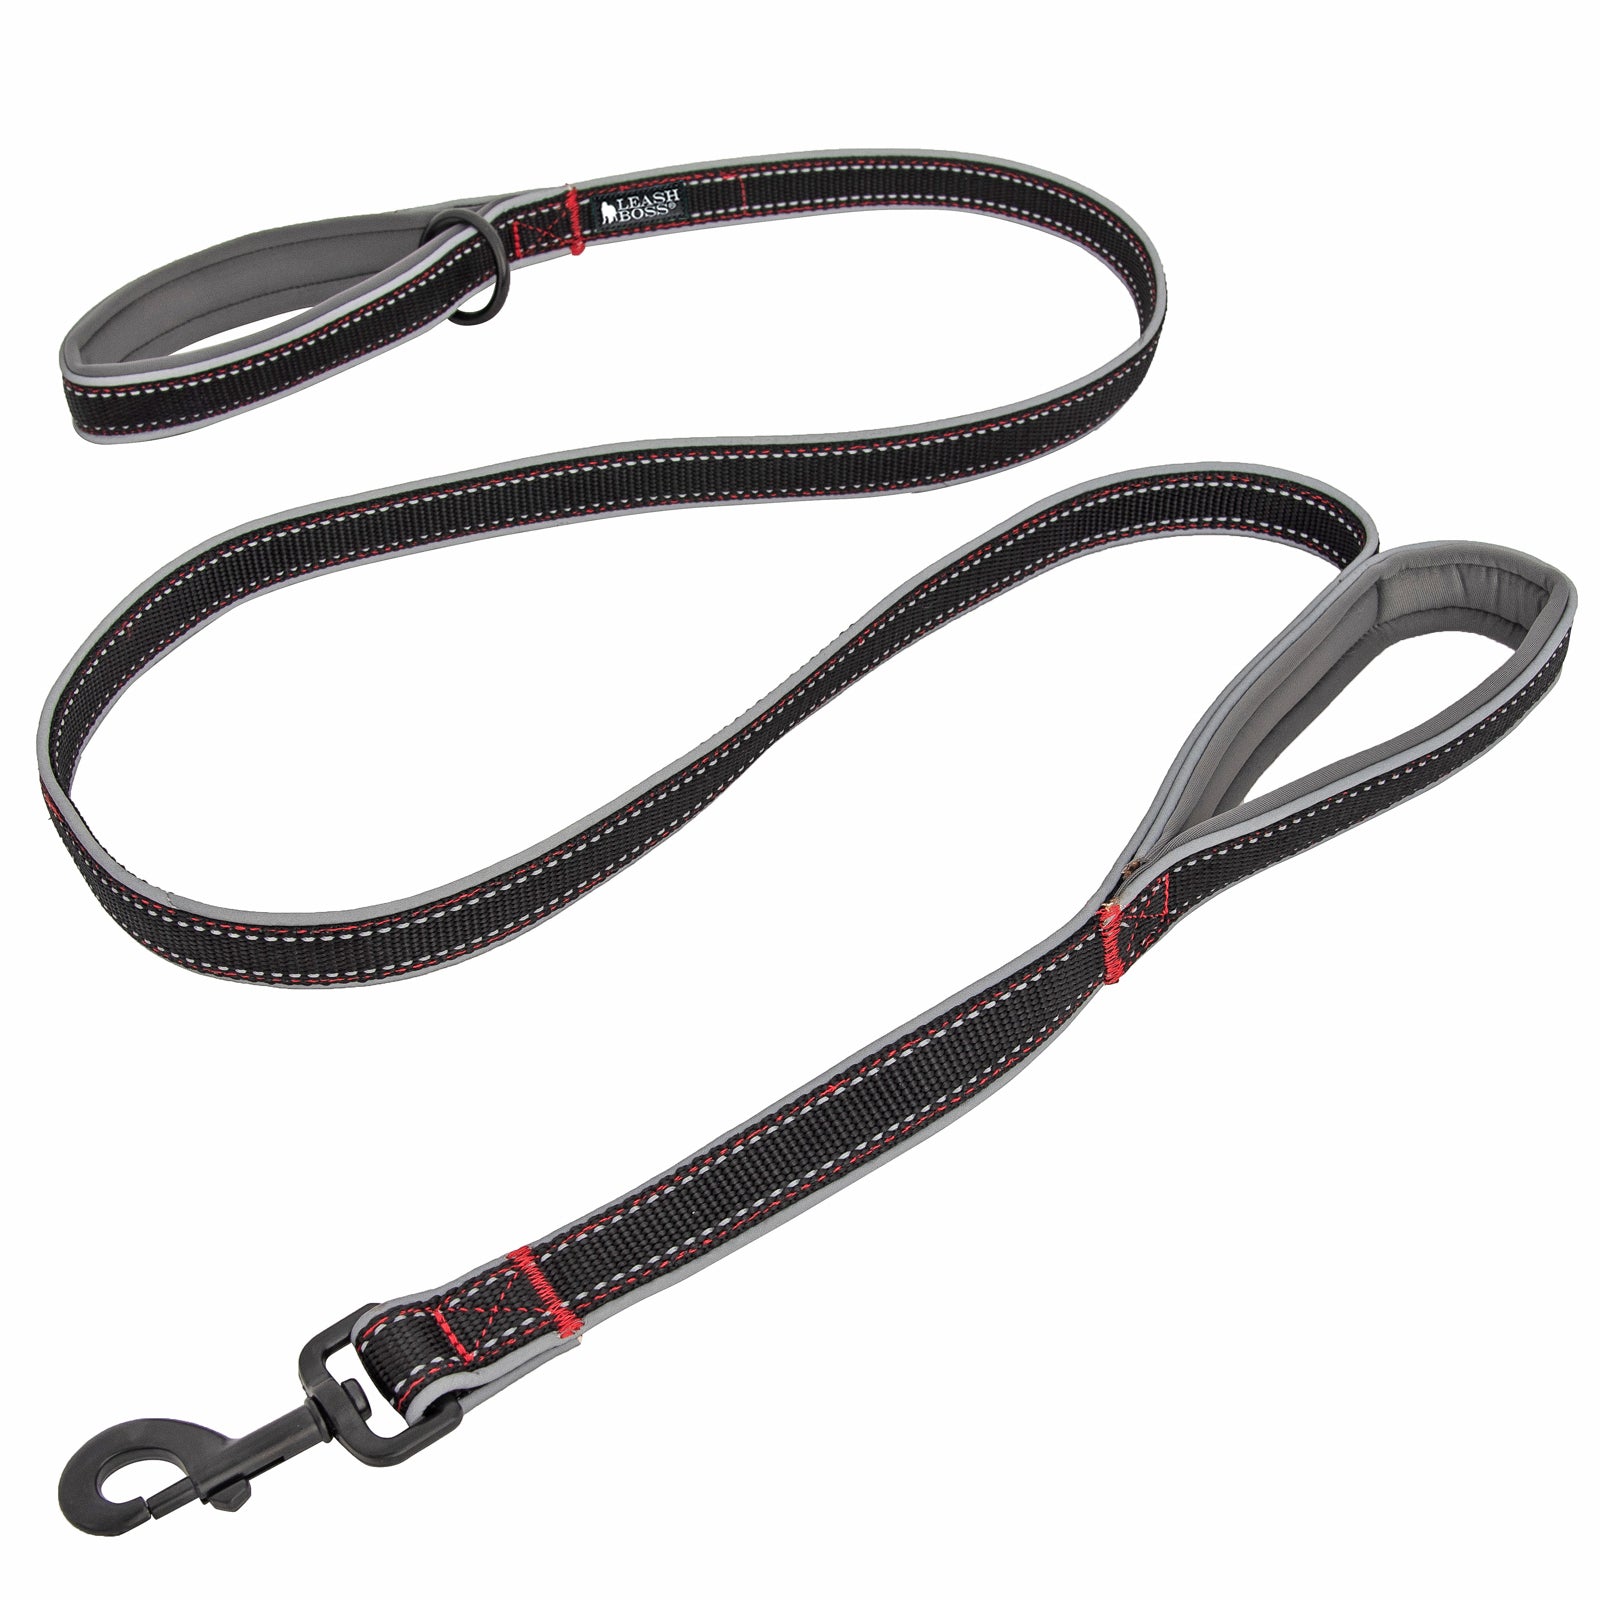 Max and Neo Double Handle Traffic Dog Leash Reflective - We Donate A Leash to A Dog Rescue for Every Leash Sold (Red, 6 ft)